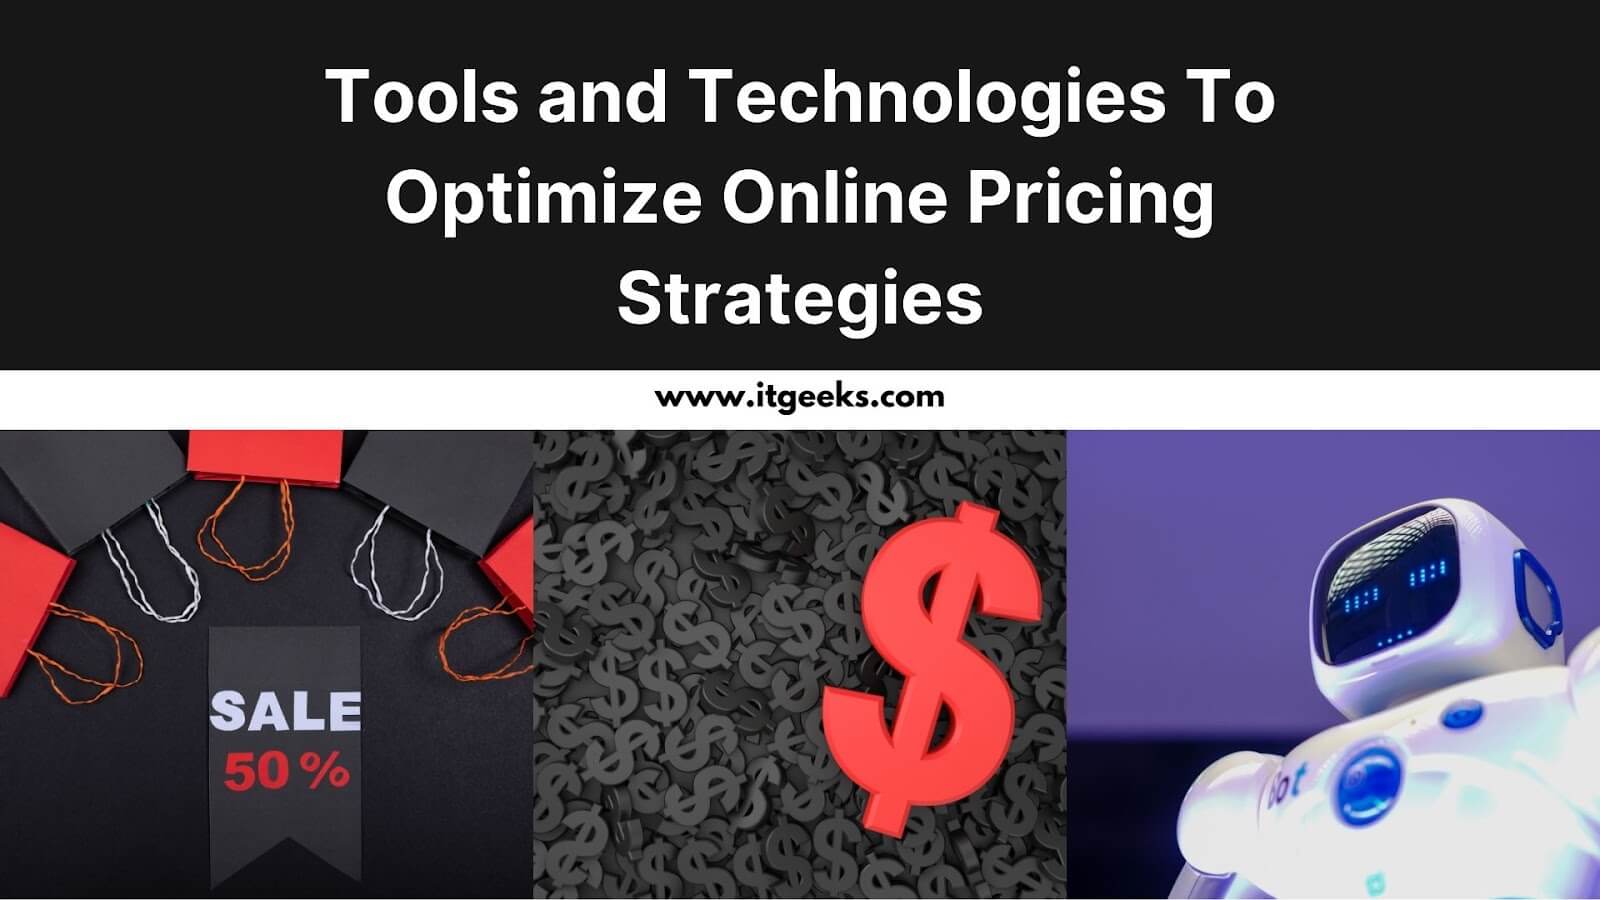 Tools and Technologies to Optimize Online Pricing Strategies